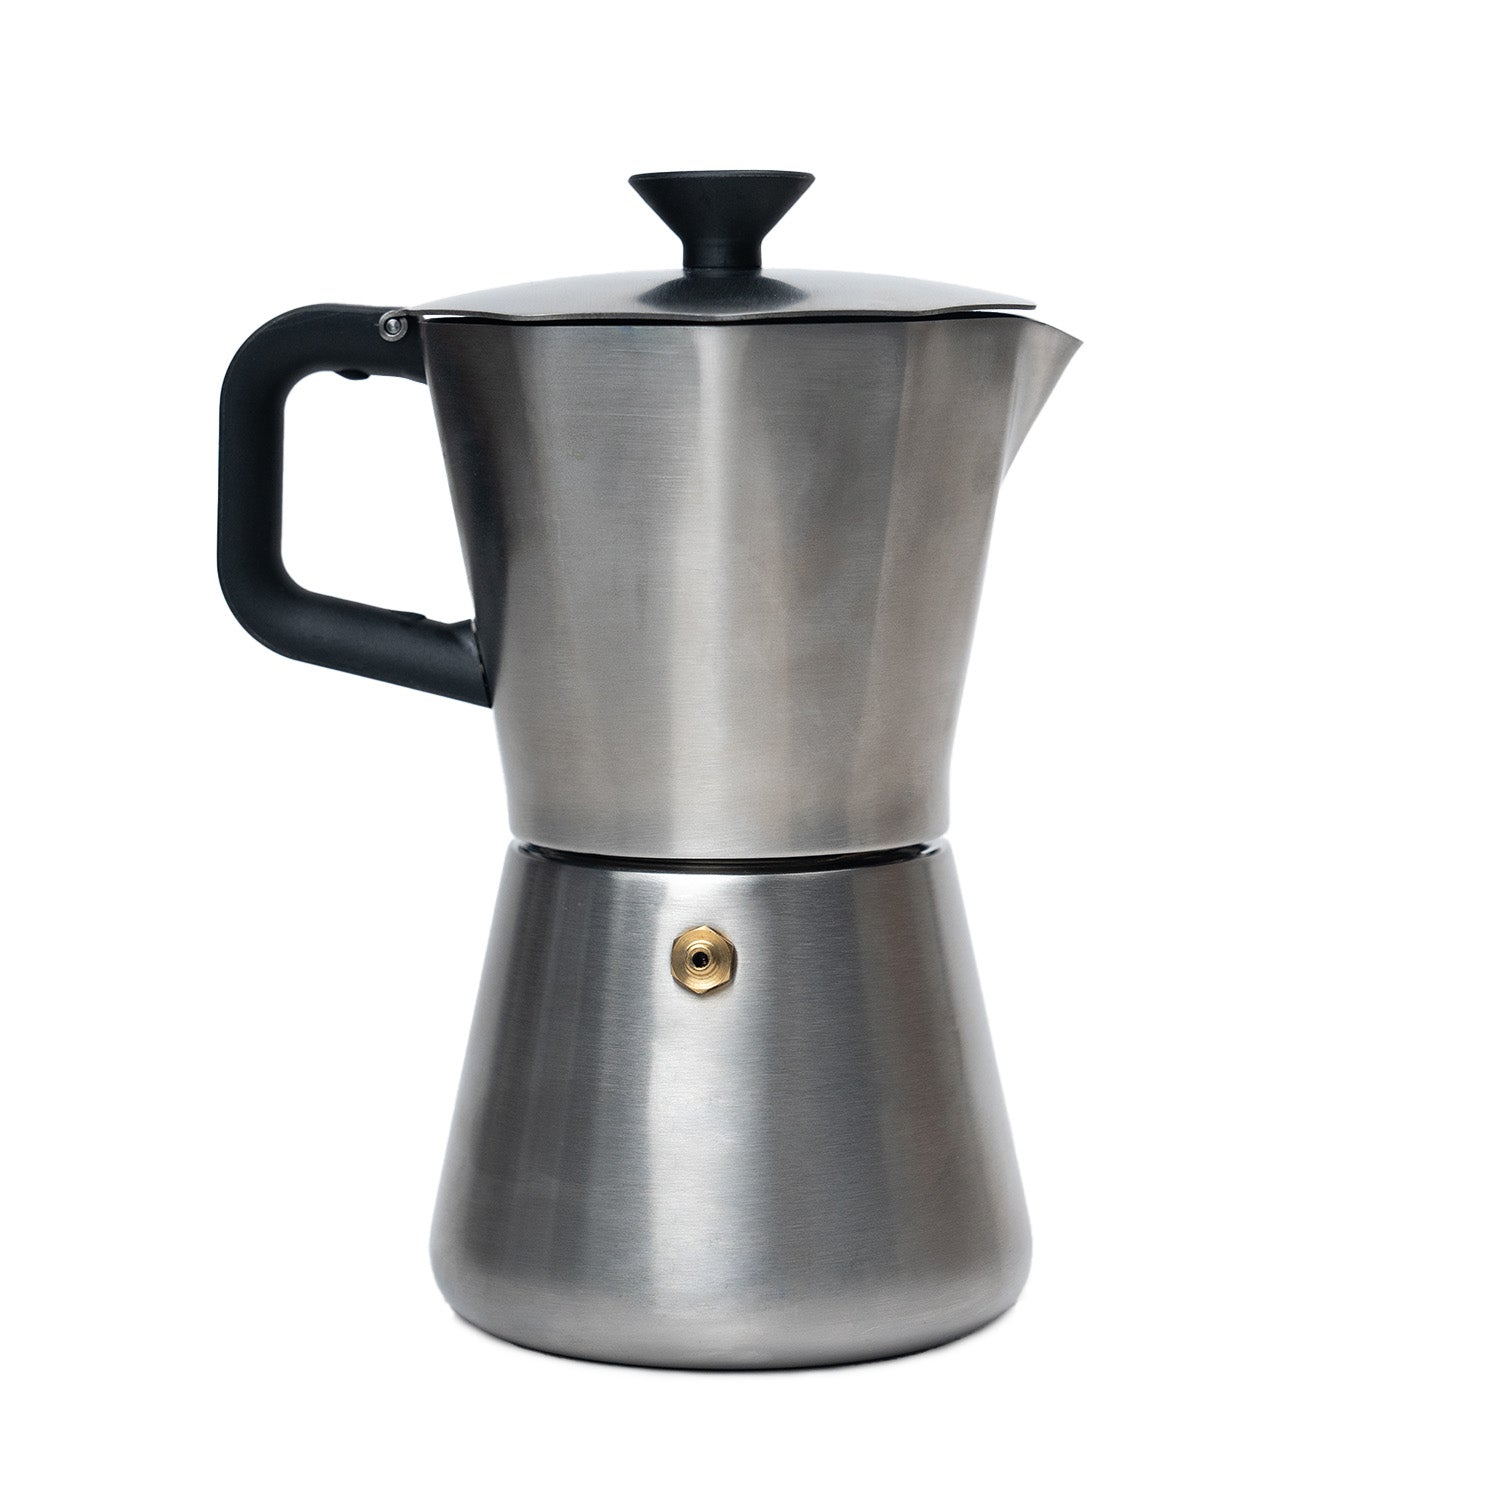 Stainless Steel Mocha Espresso Percolator Coffee Pot Stainless